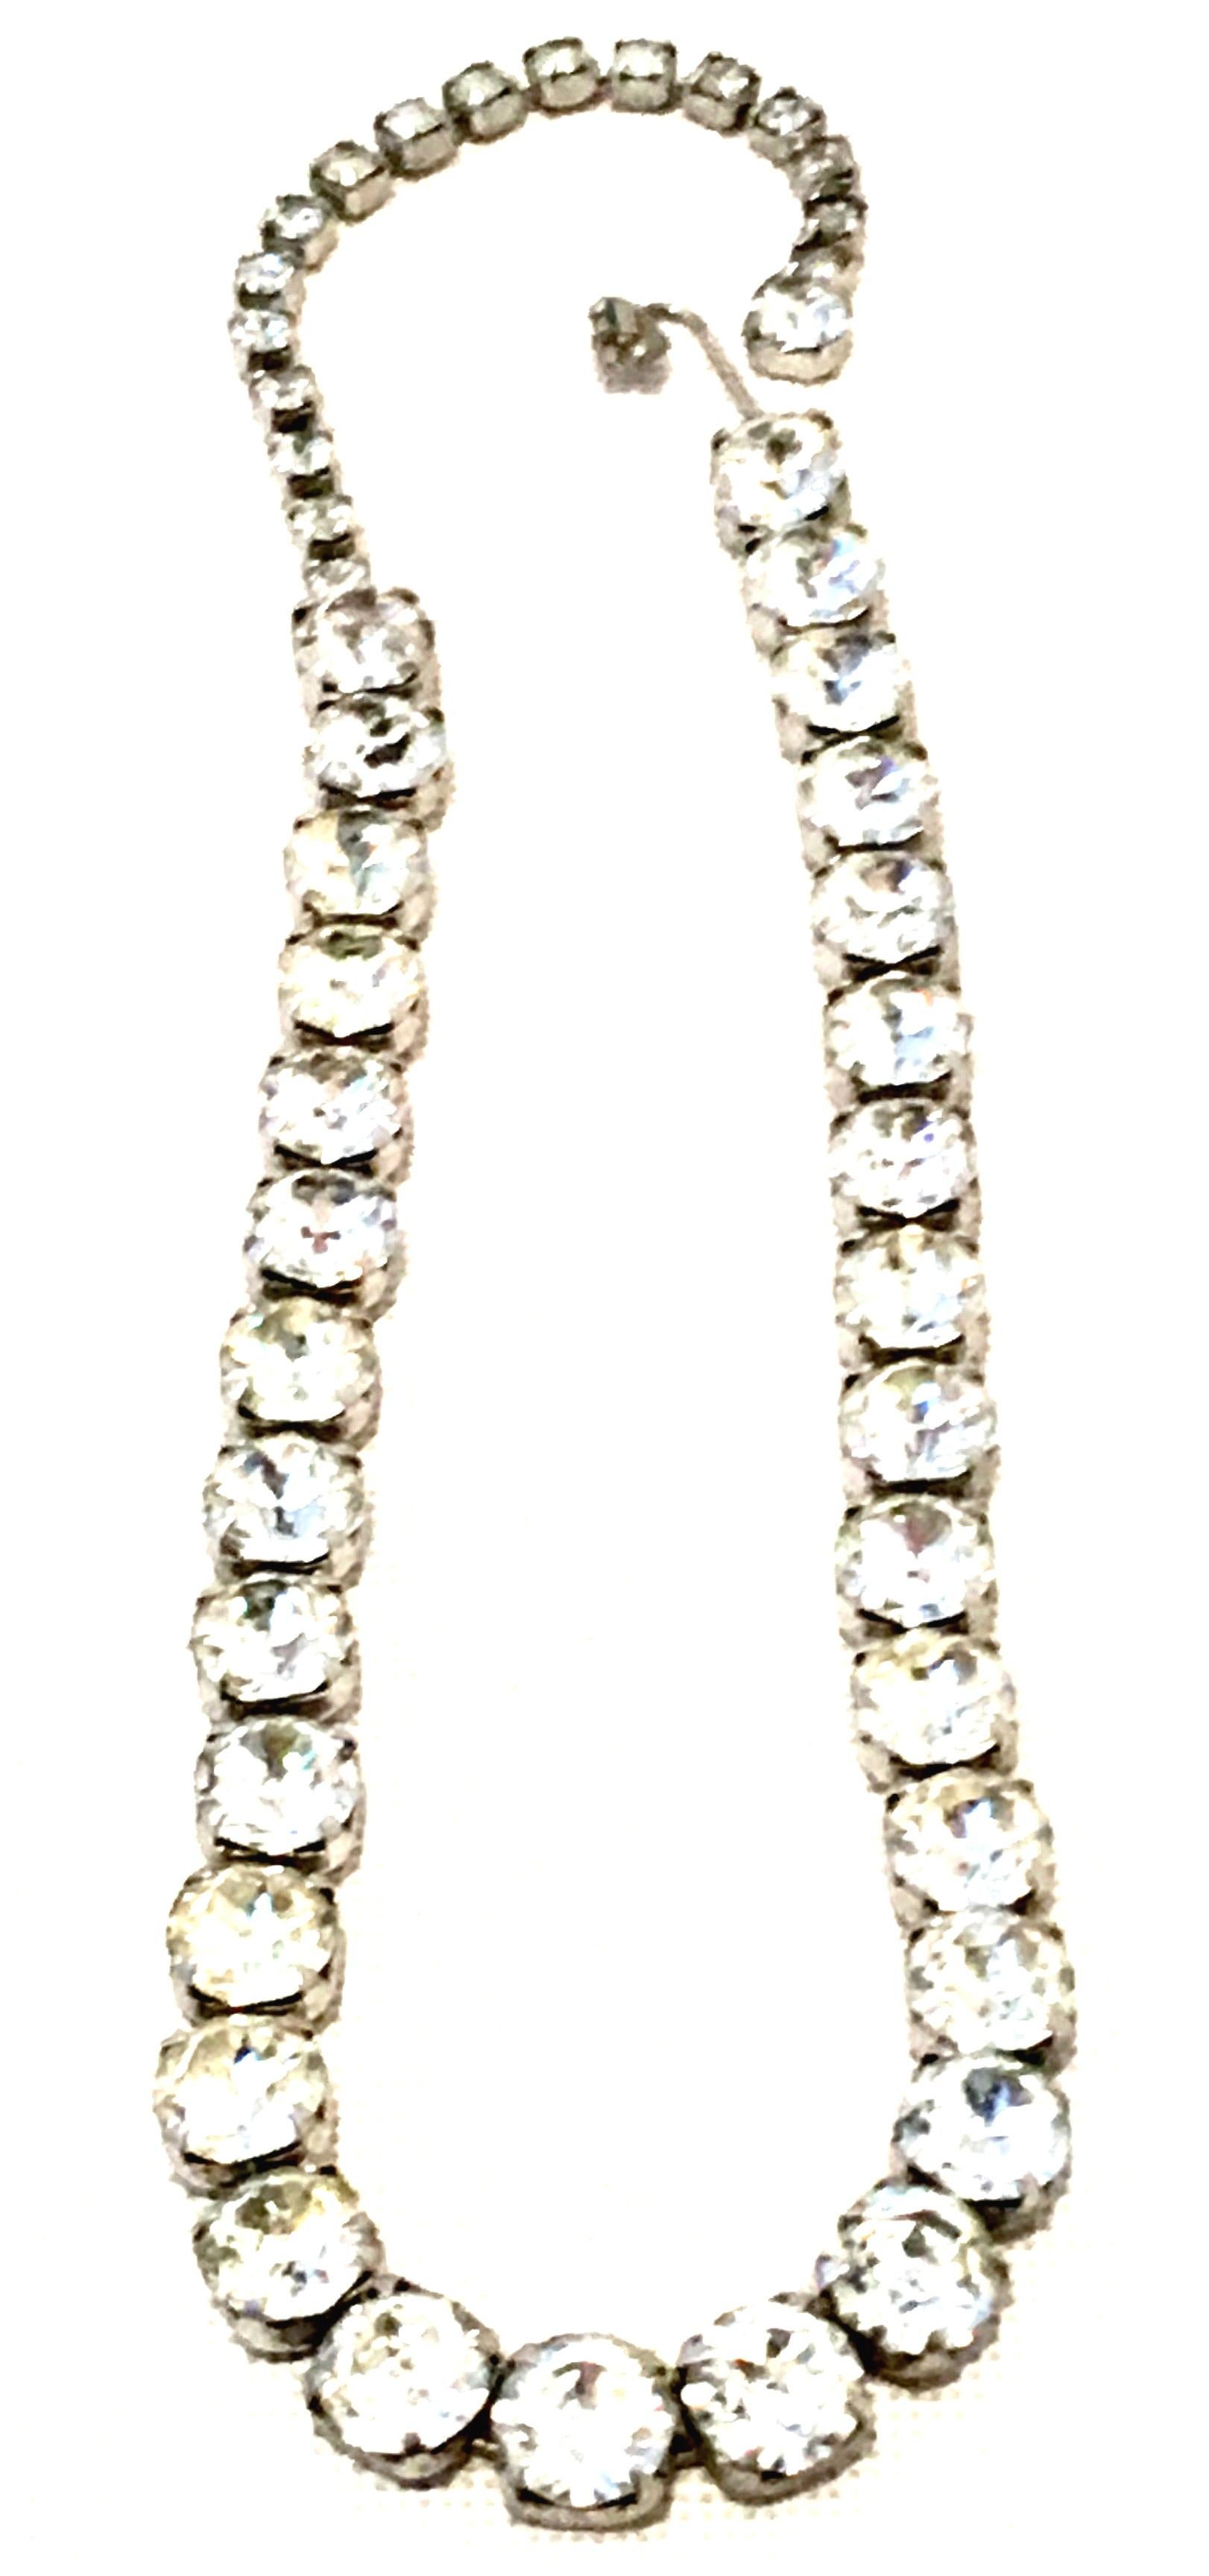 Women's or Men's Mid-20th Century Silver & Austrian Crystal Choker Style Necklace